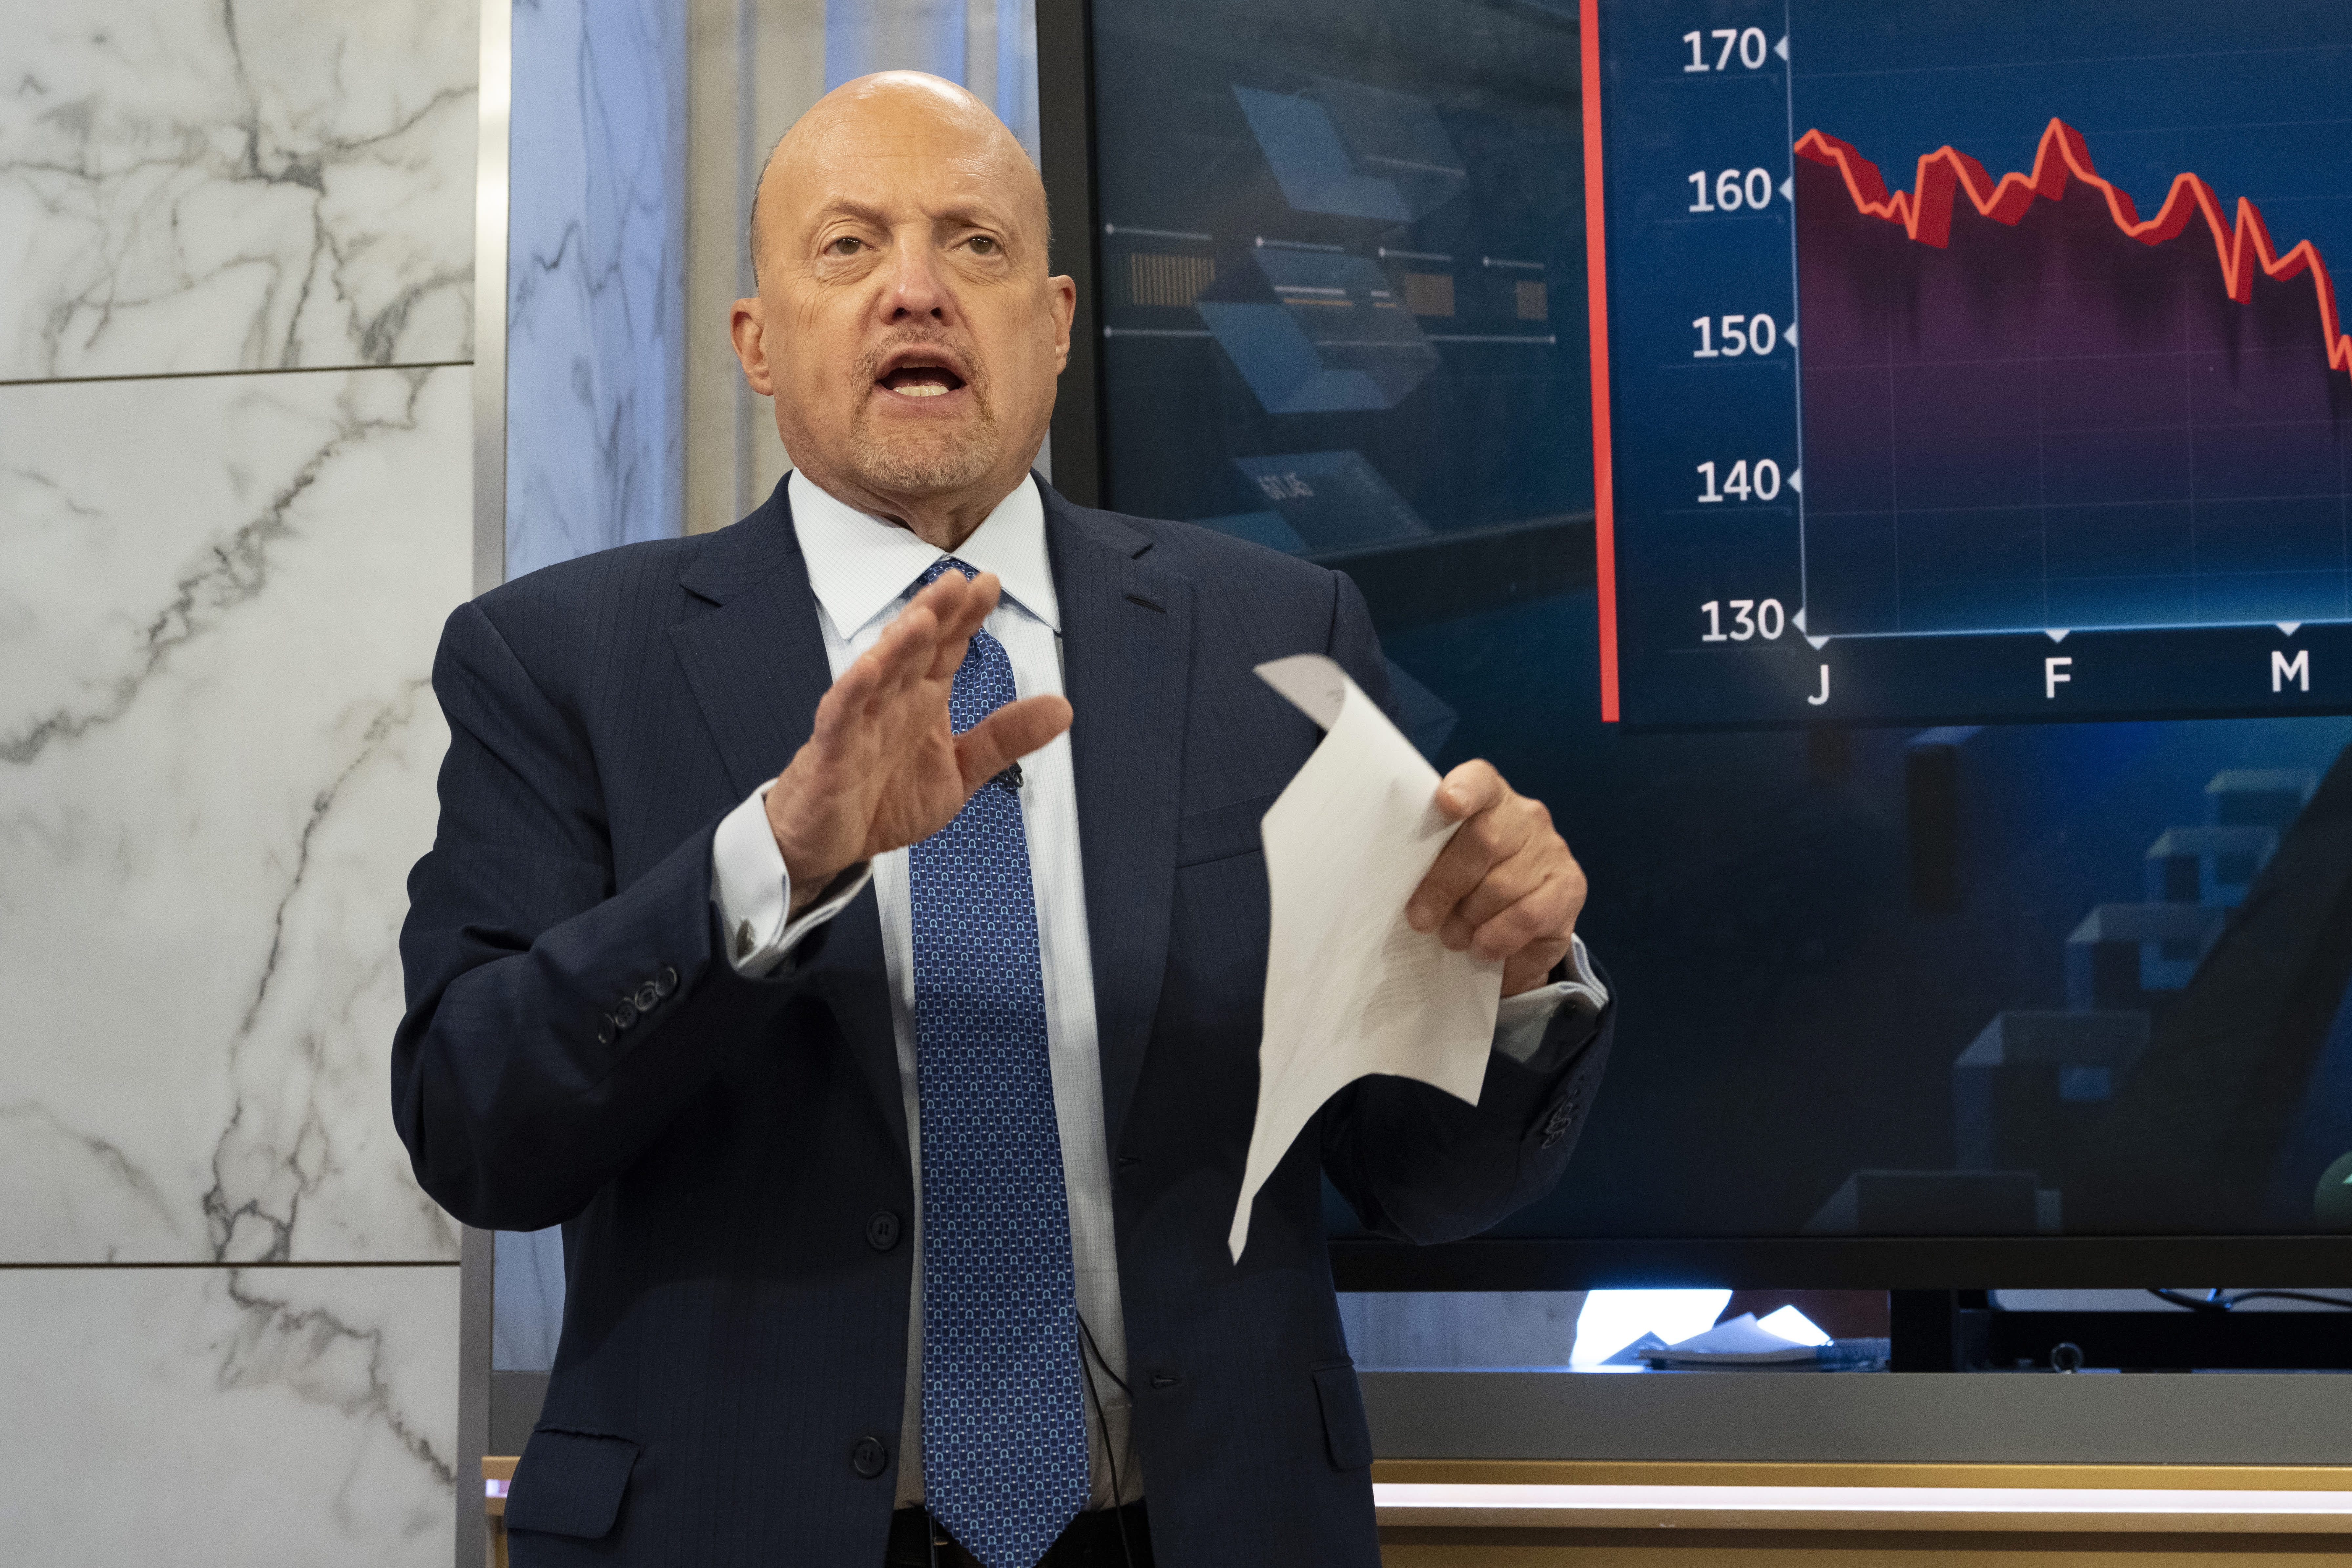 Jim Cramer: Here's why I still believe we've seen the lows of this tough market